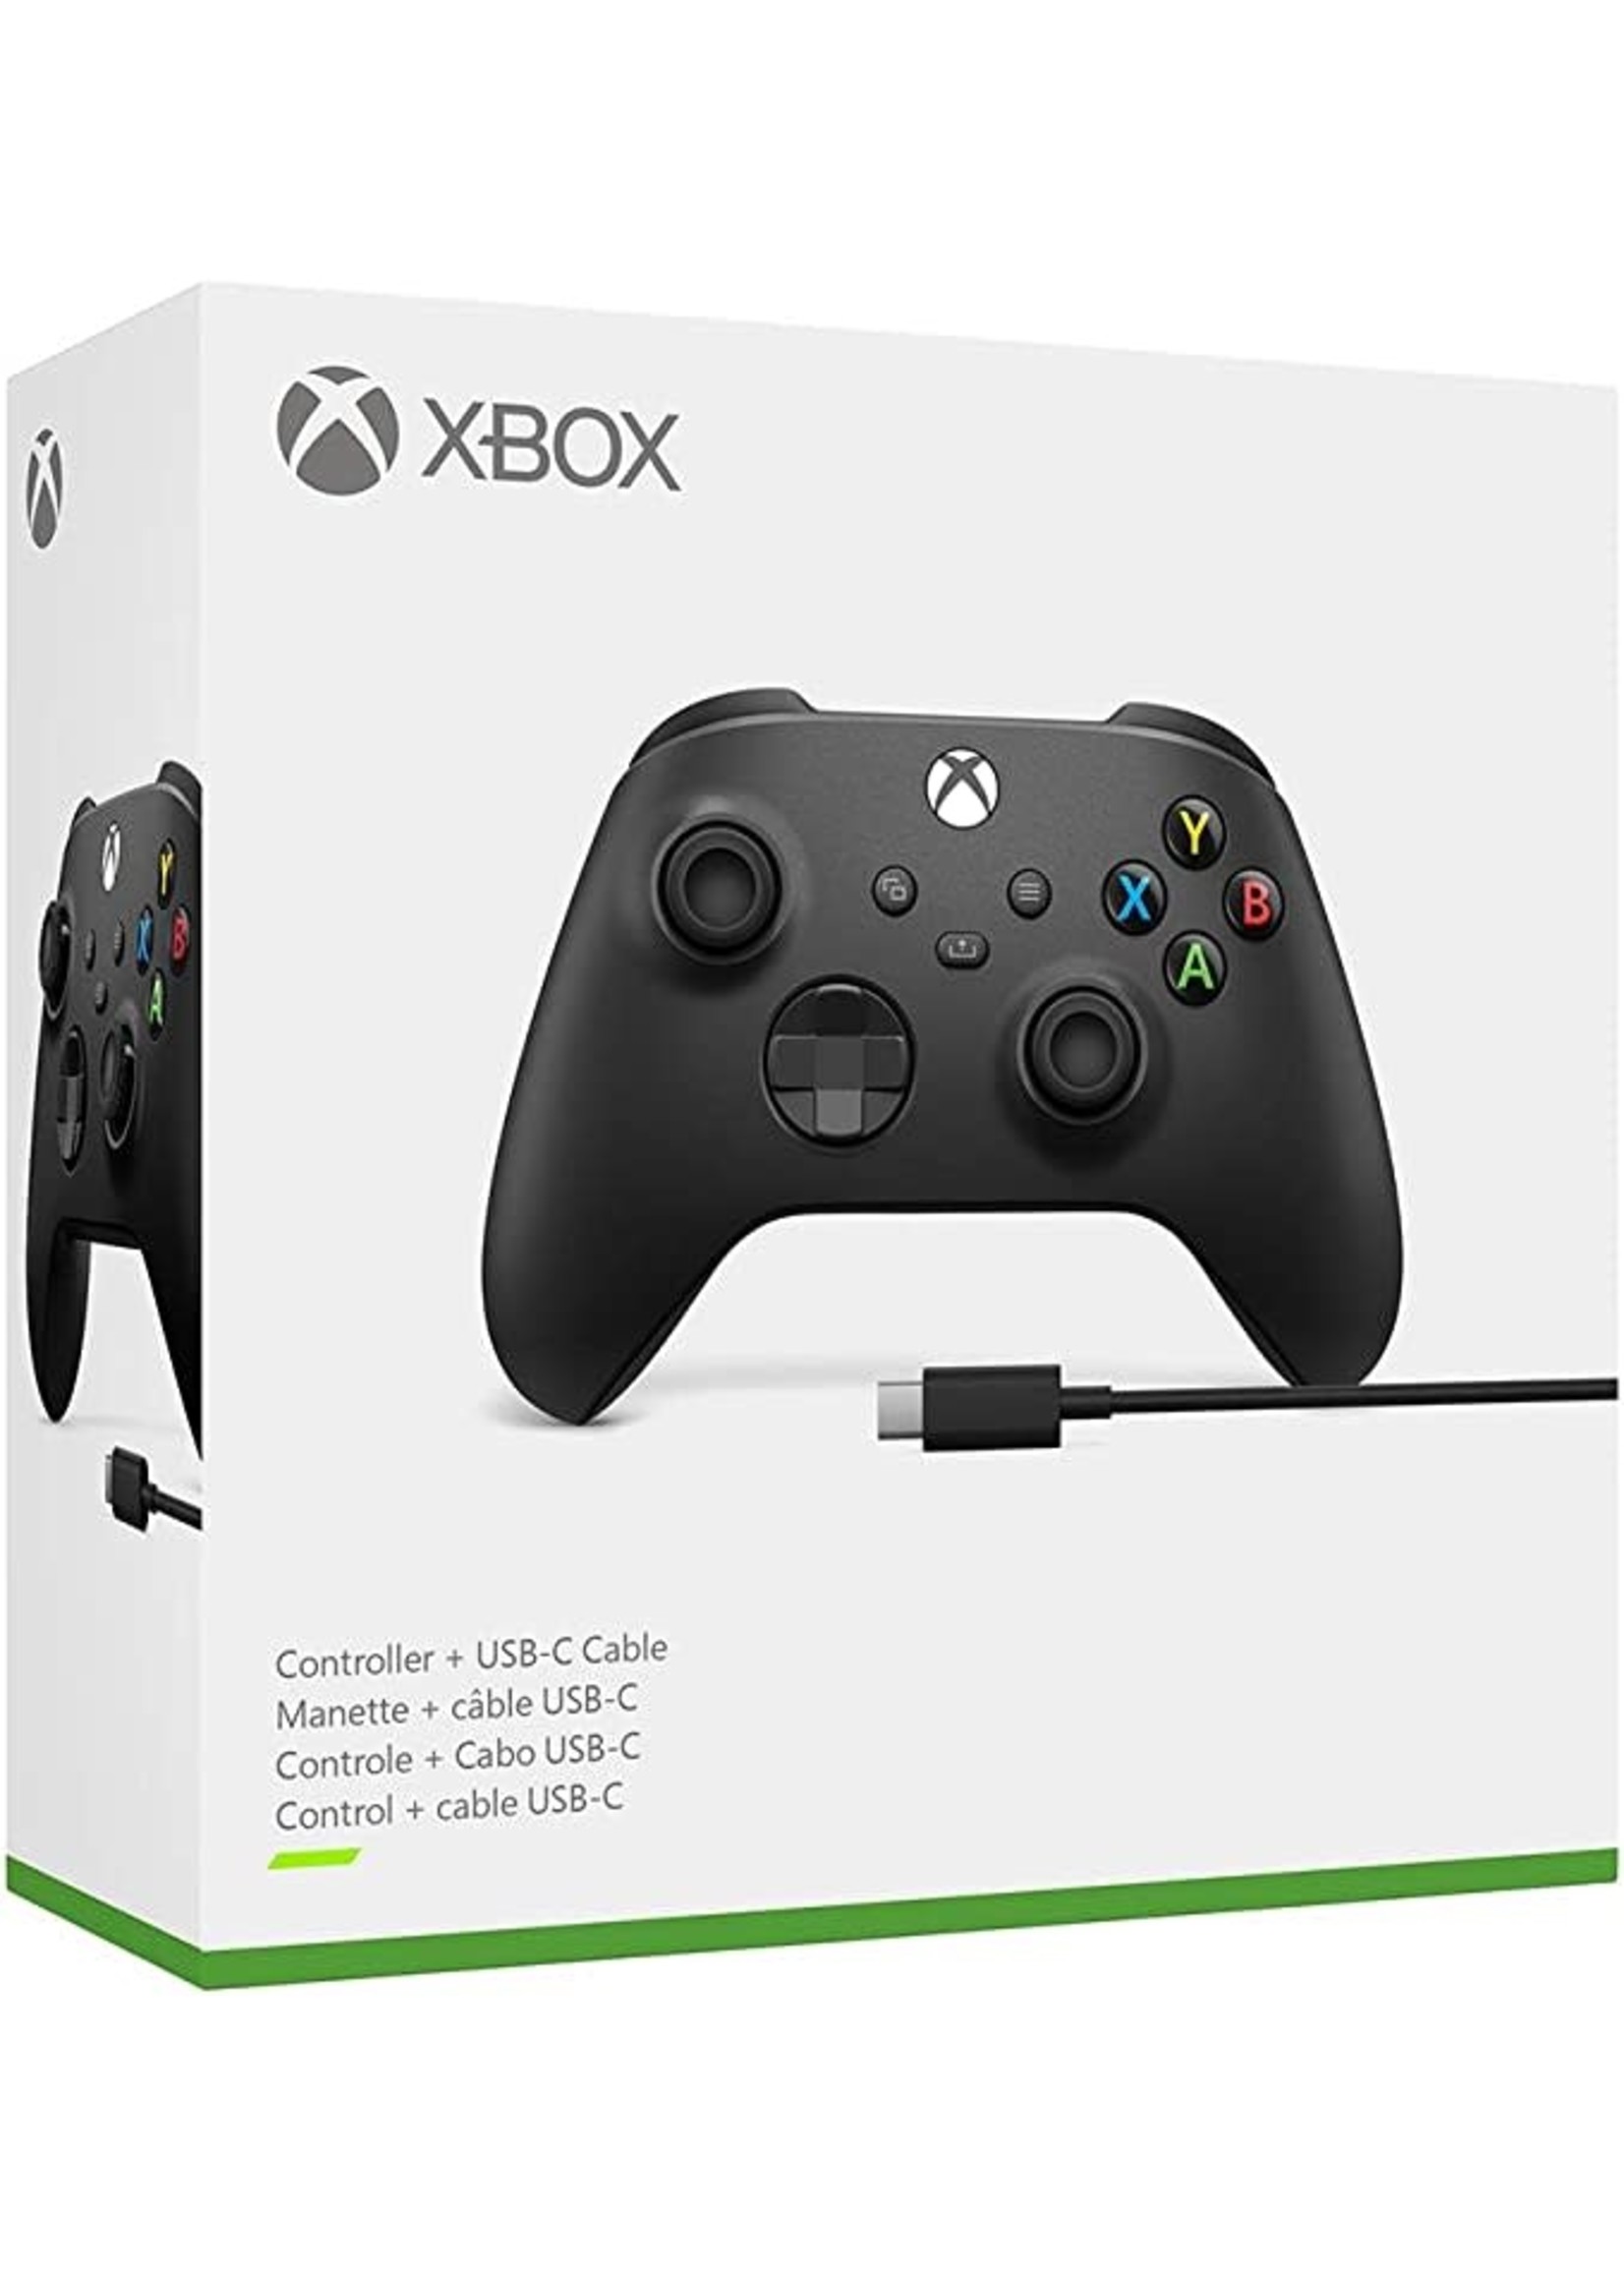 Manette  Xbox Wireless Controller + USB-C Cable